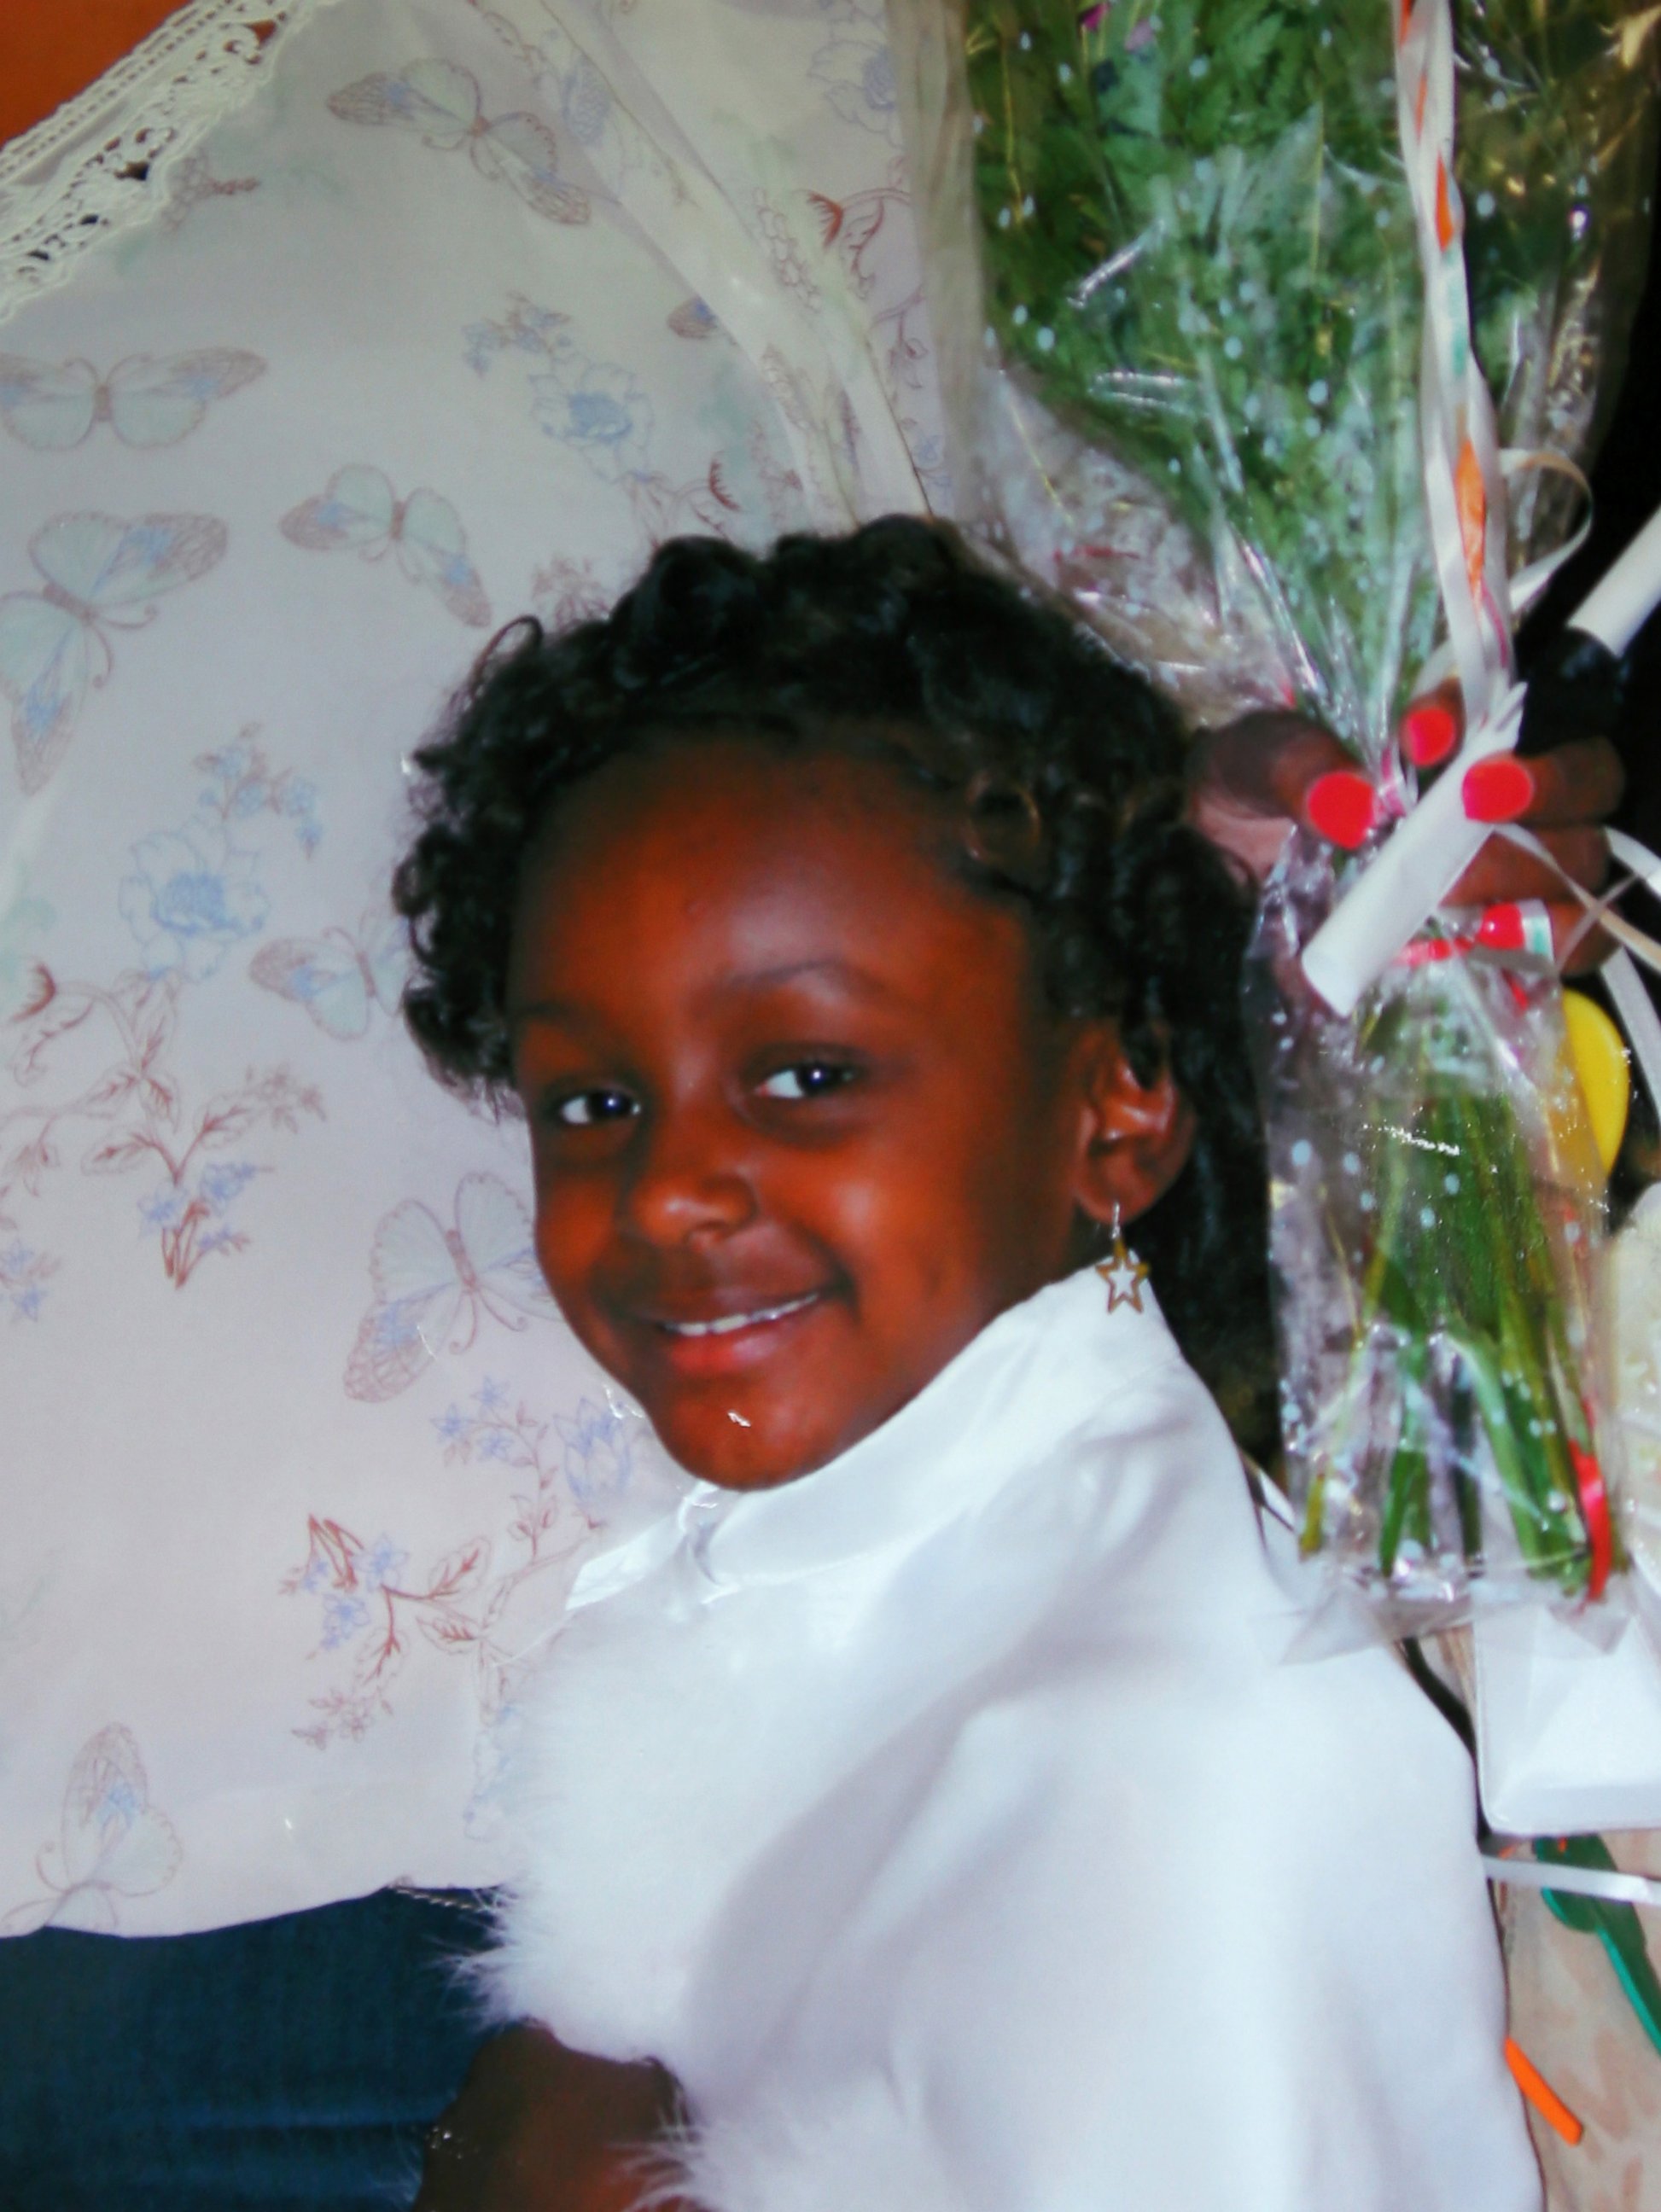 PHOTO: Heaven Sutton, pictured at her kindergarten graduation, was shot and killed in front of her home in Chicago, Illinois. (Courtesy Ashake Banks via Chicago Tribune/MCT via Getty Images)